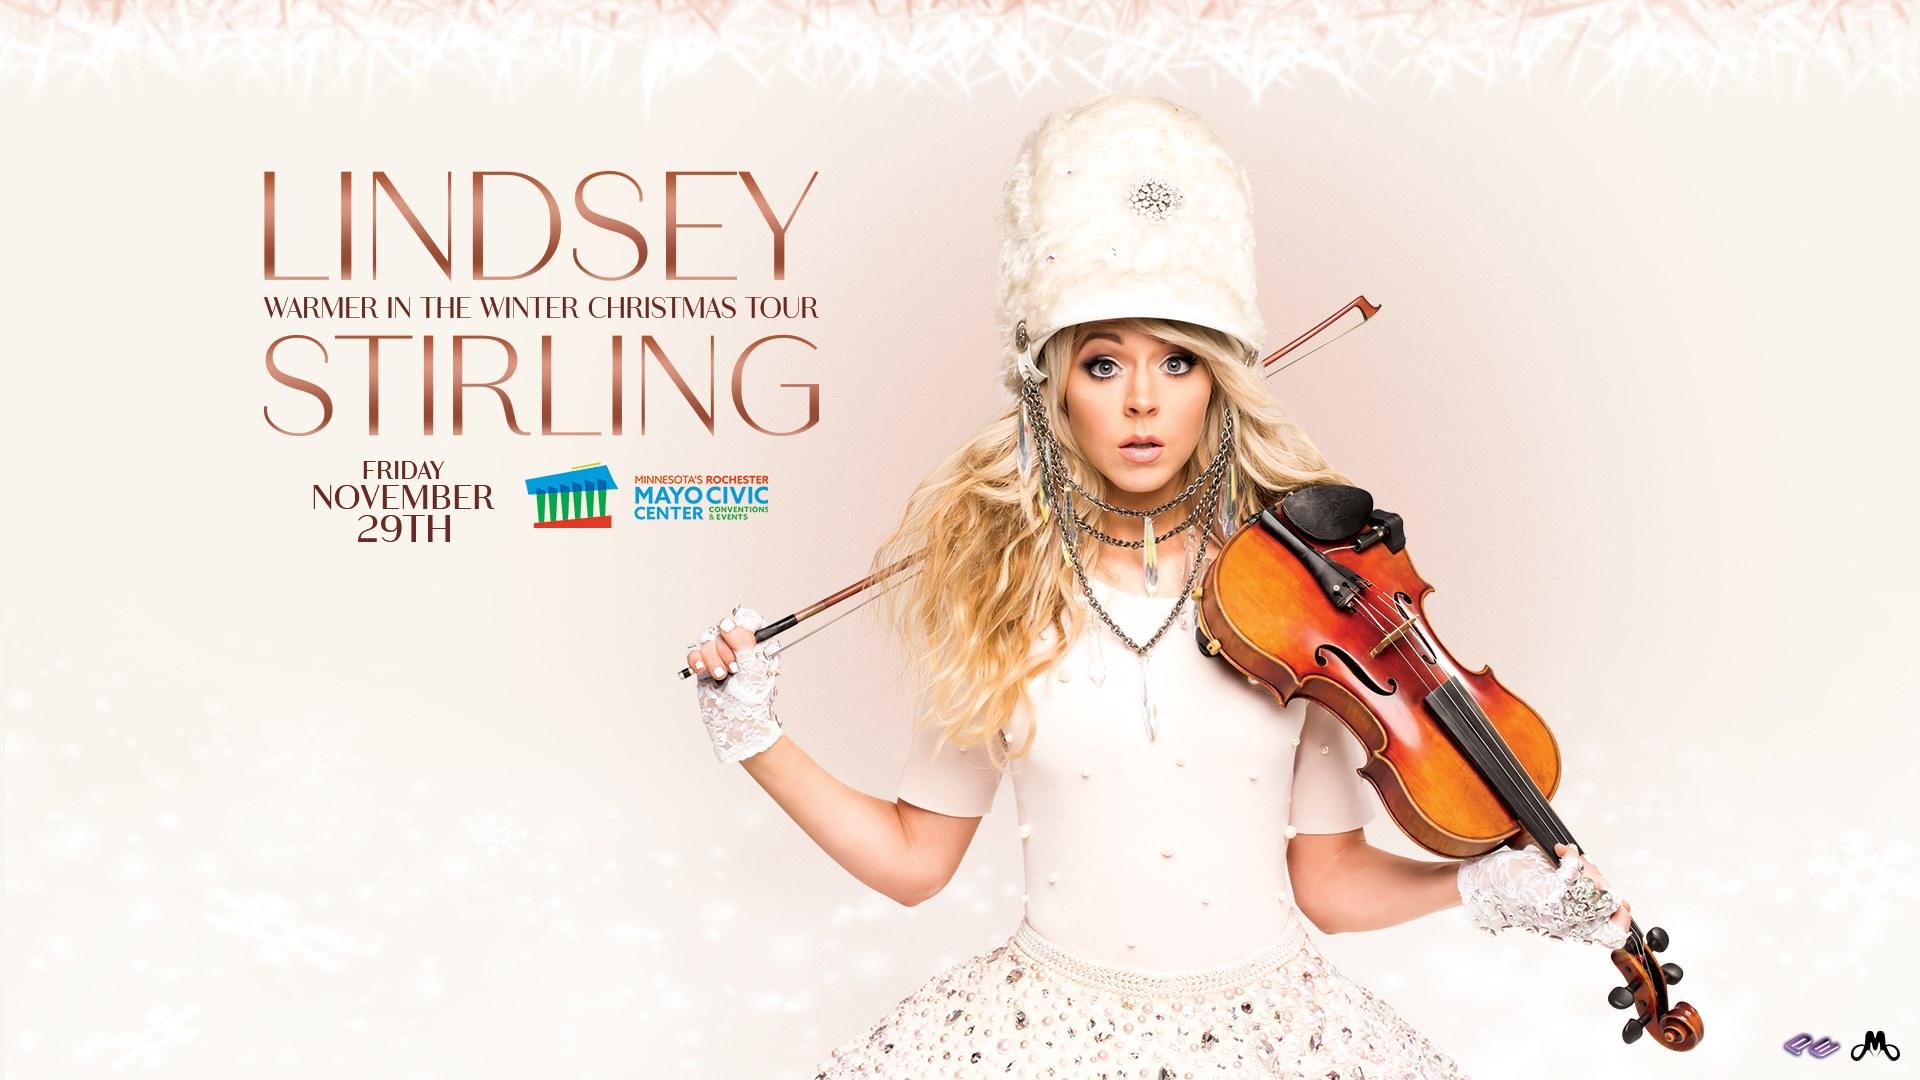 Lindsey Stirling - Warmer In The Winter Christmas Tour 2019